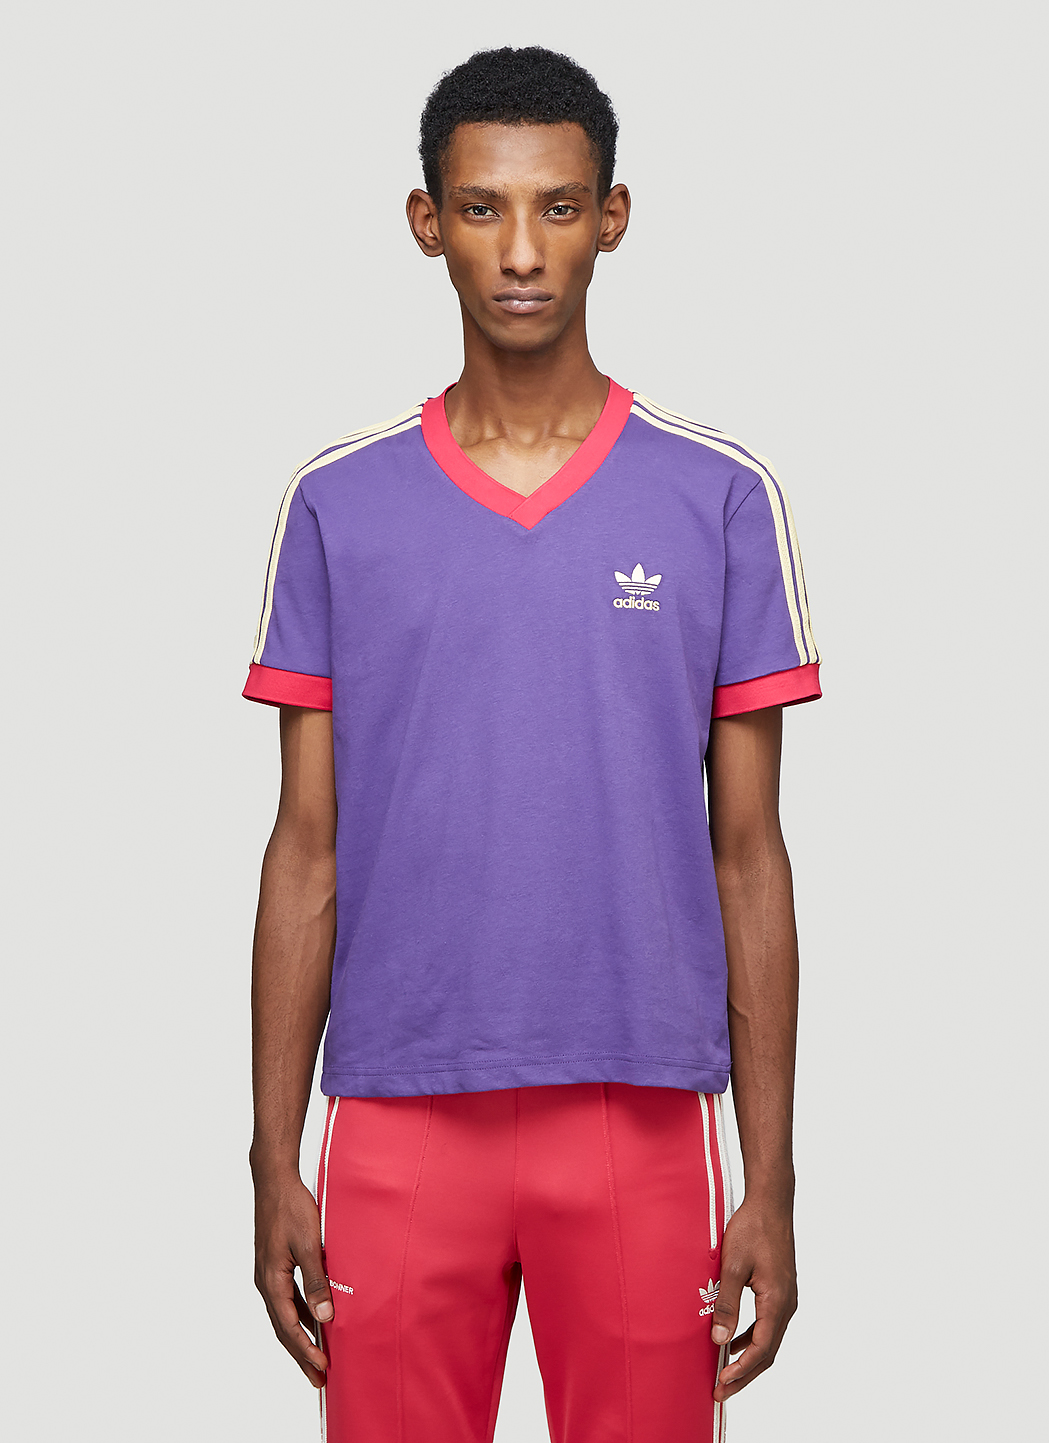 adidas by Wales Bonner Unisex 70s V-Neck T-Shirt in Purple | LN-CC